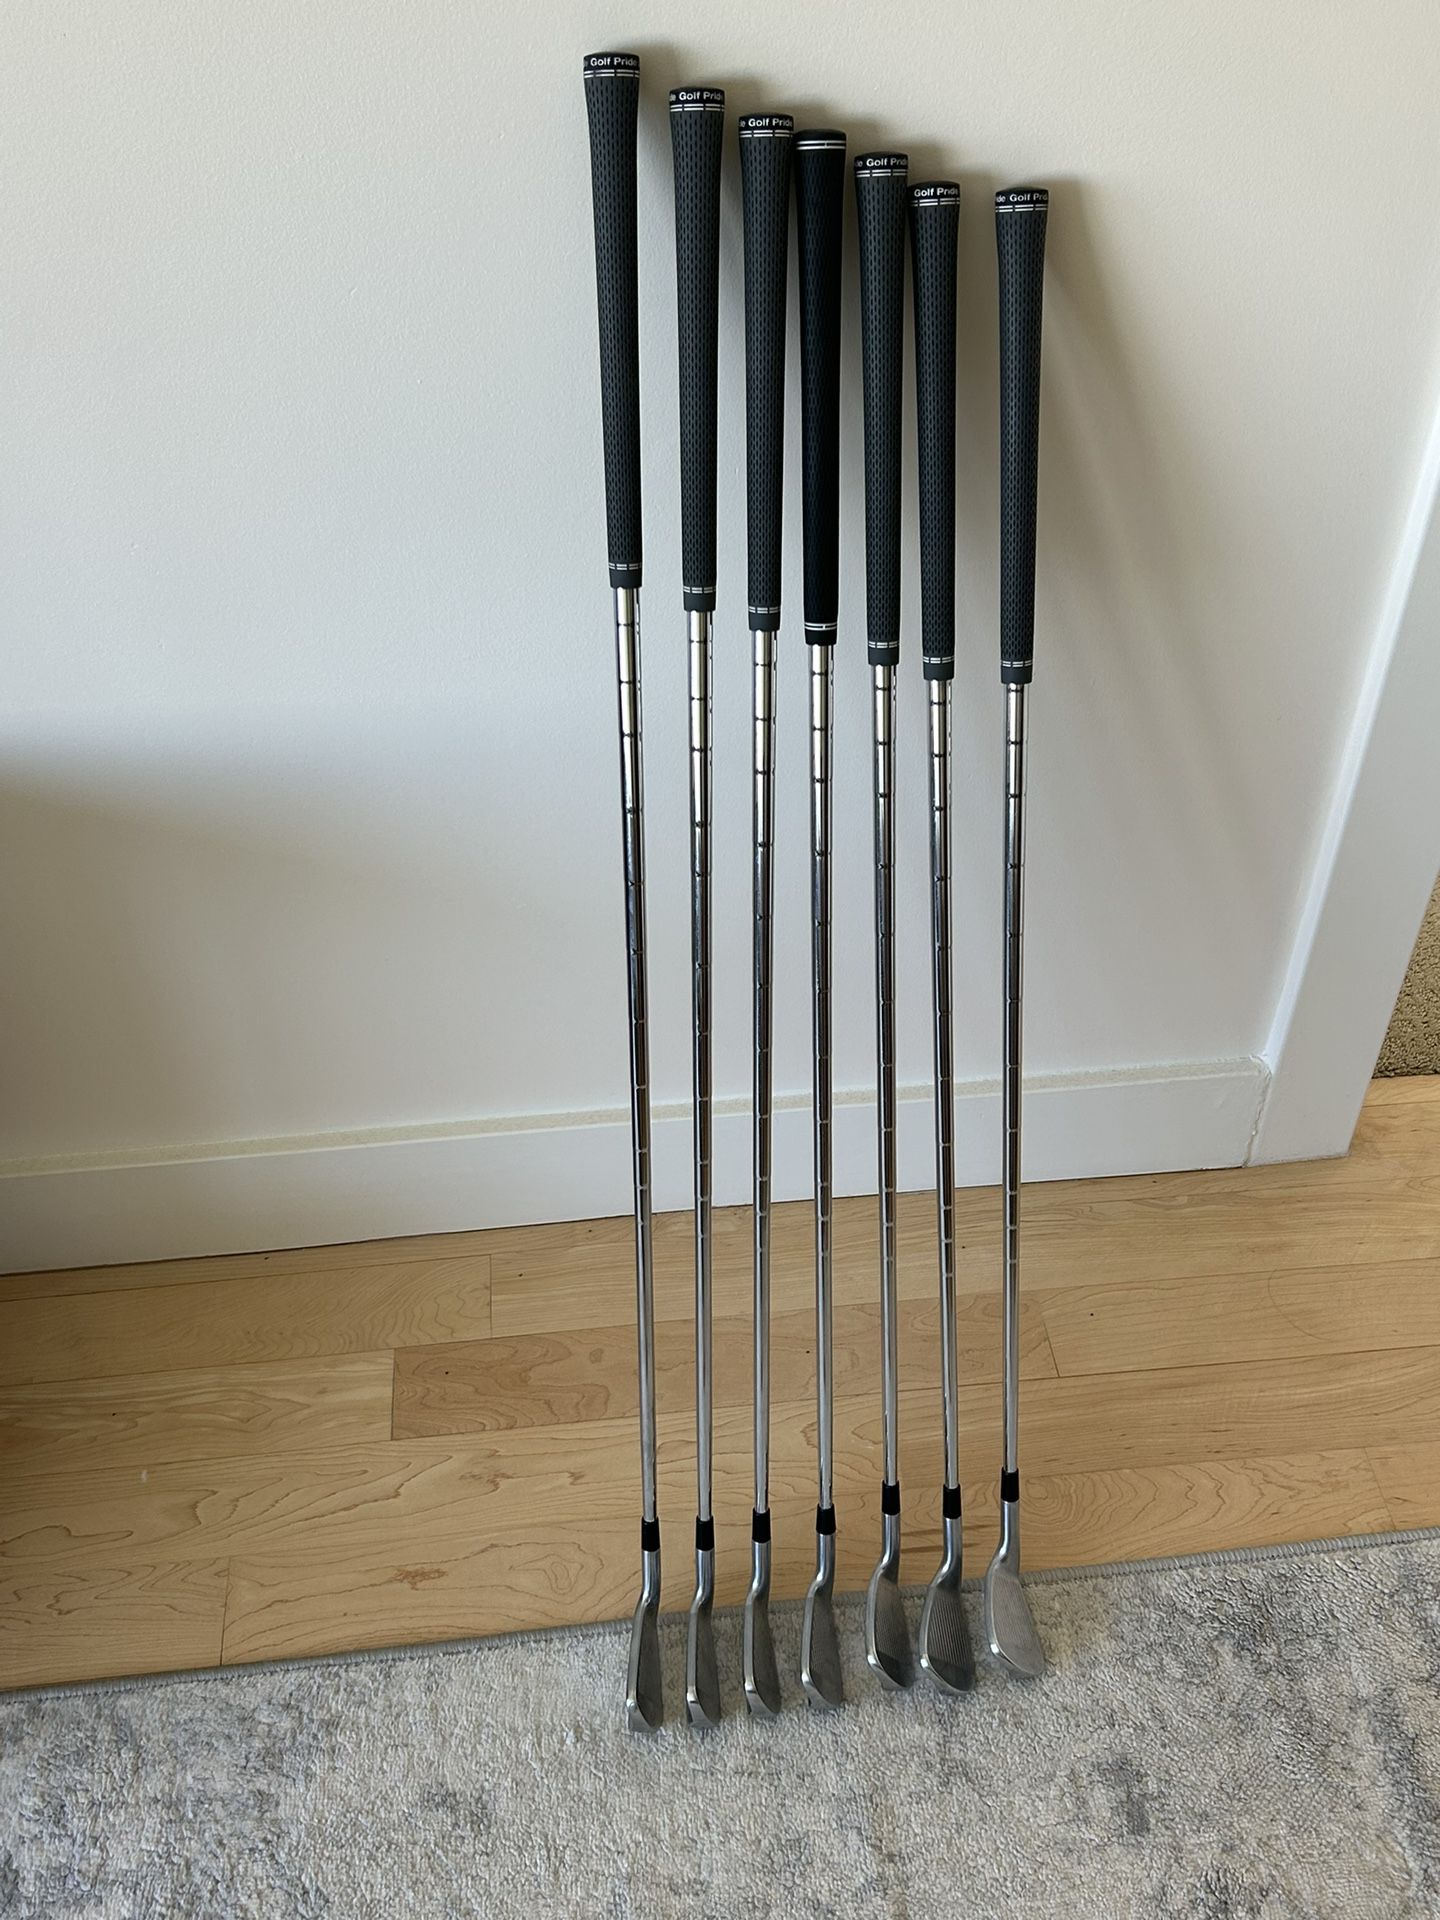 2019 TaylorMade P790s 4-PW